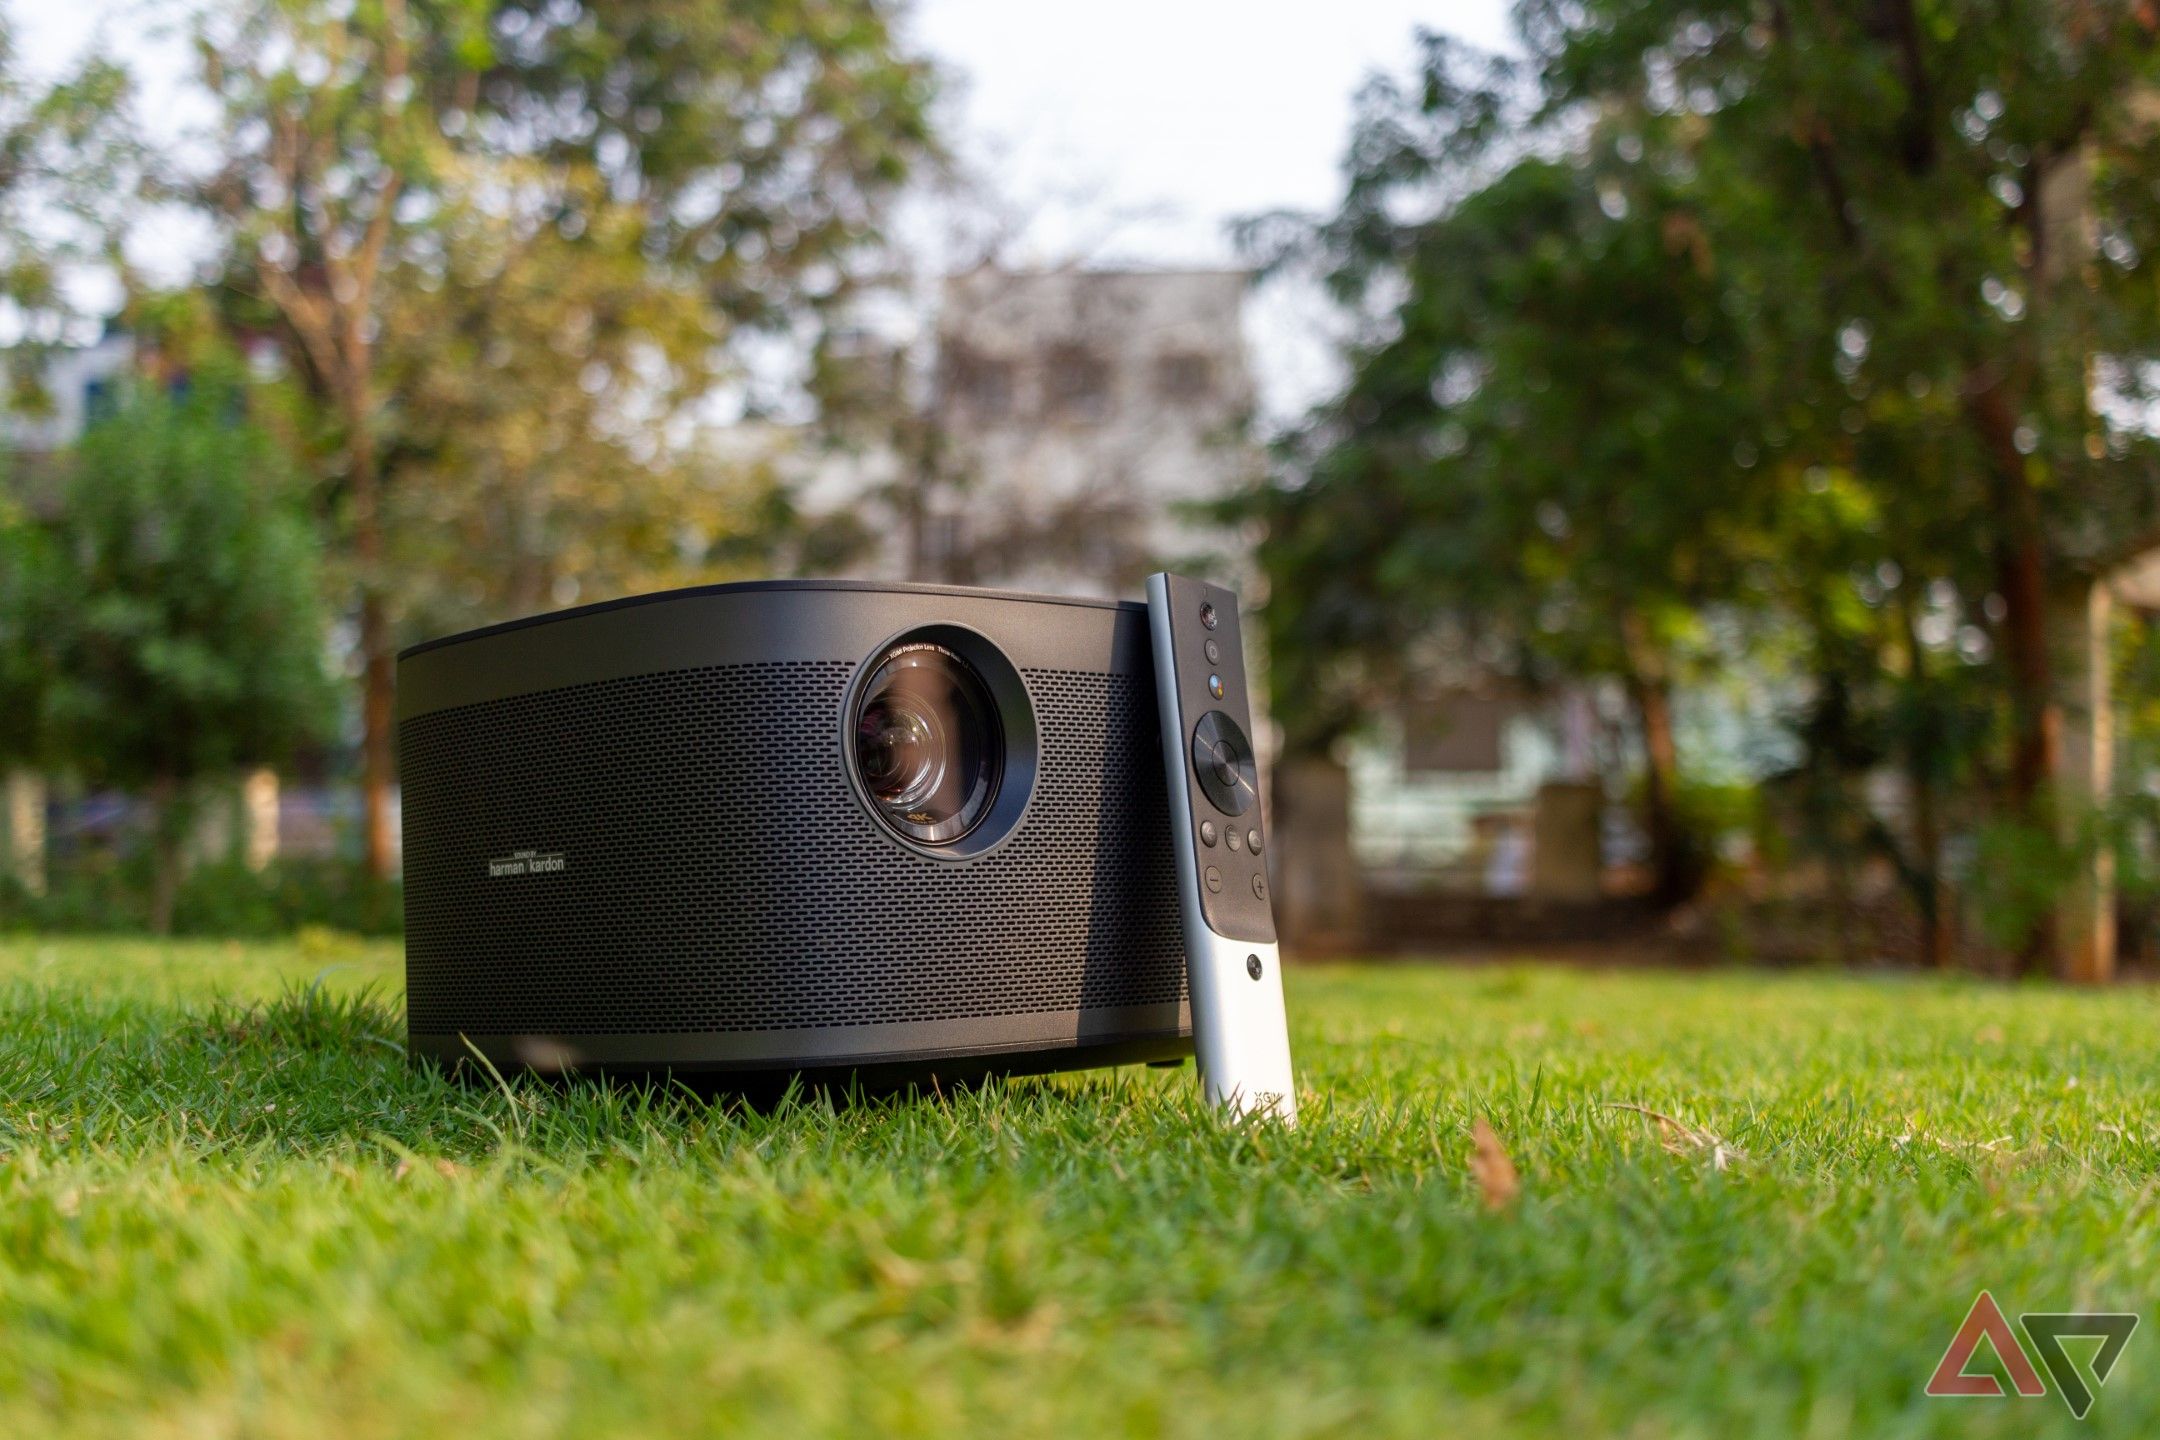 Xgimi Horizon Pro projector and its remote on a green lawn